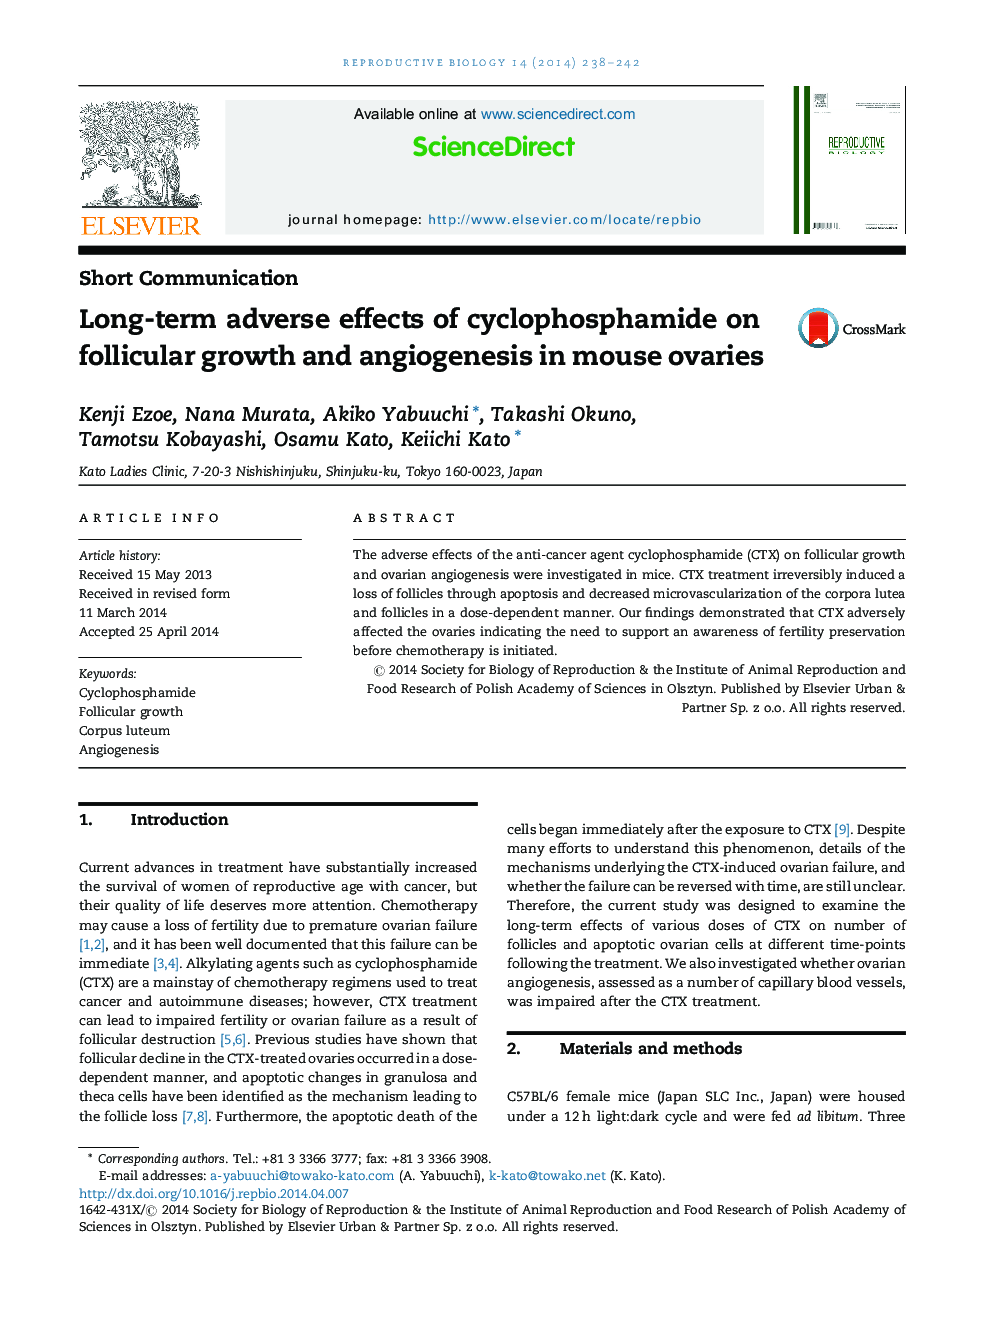 Long-term adverse effects of cyclophosphamide on follicular growth and angiogenesis in mouse ovaries